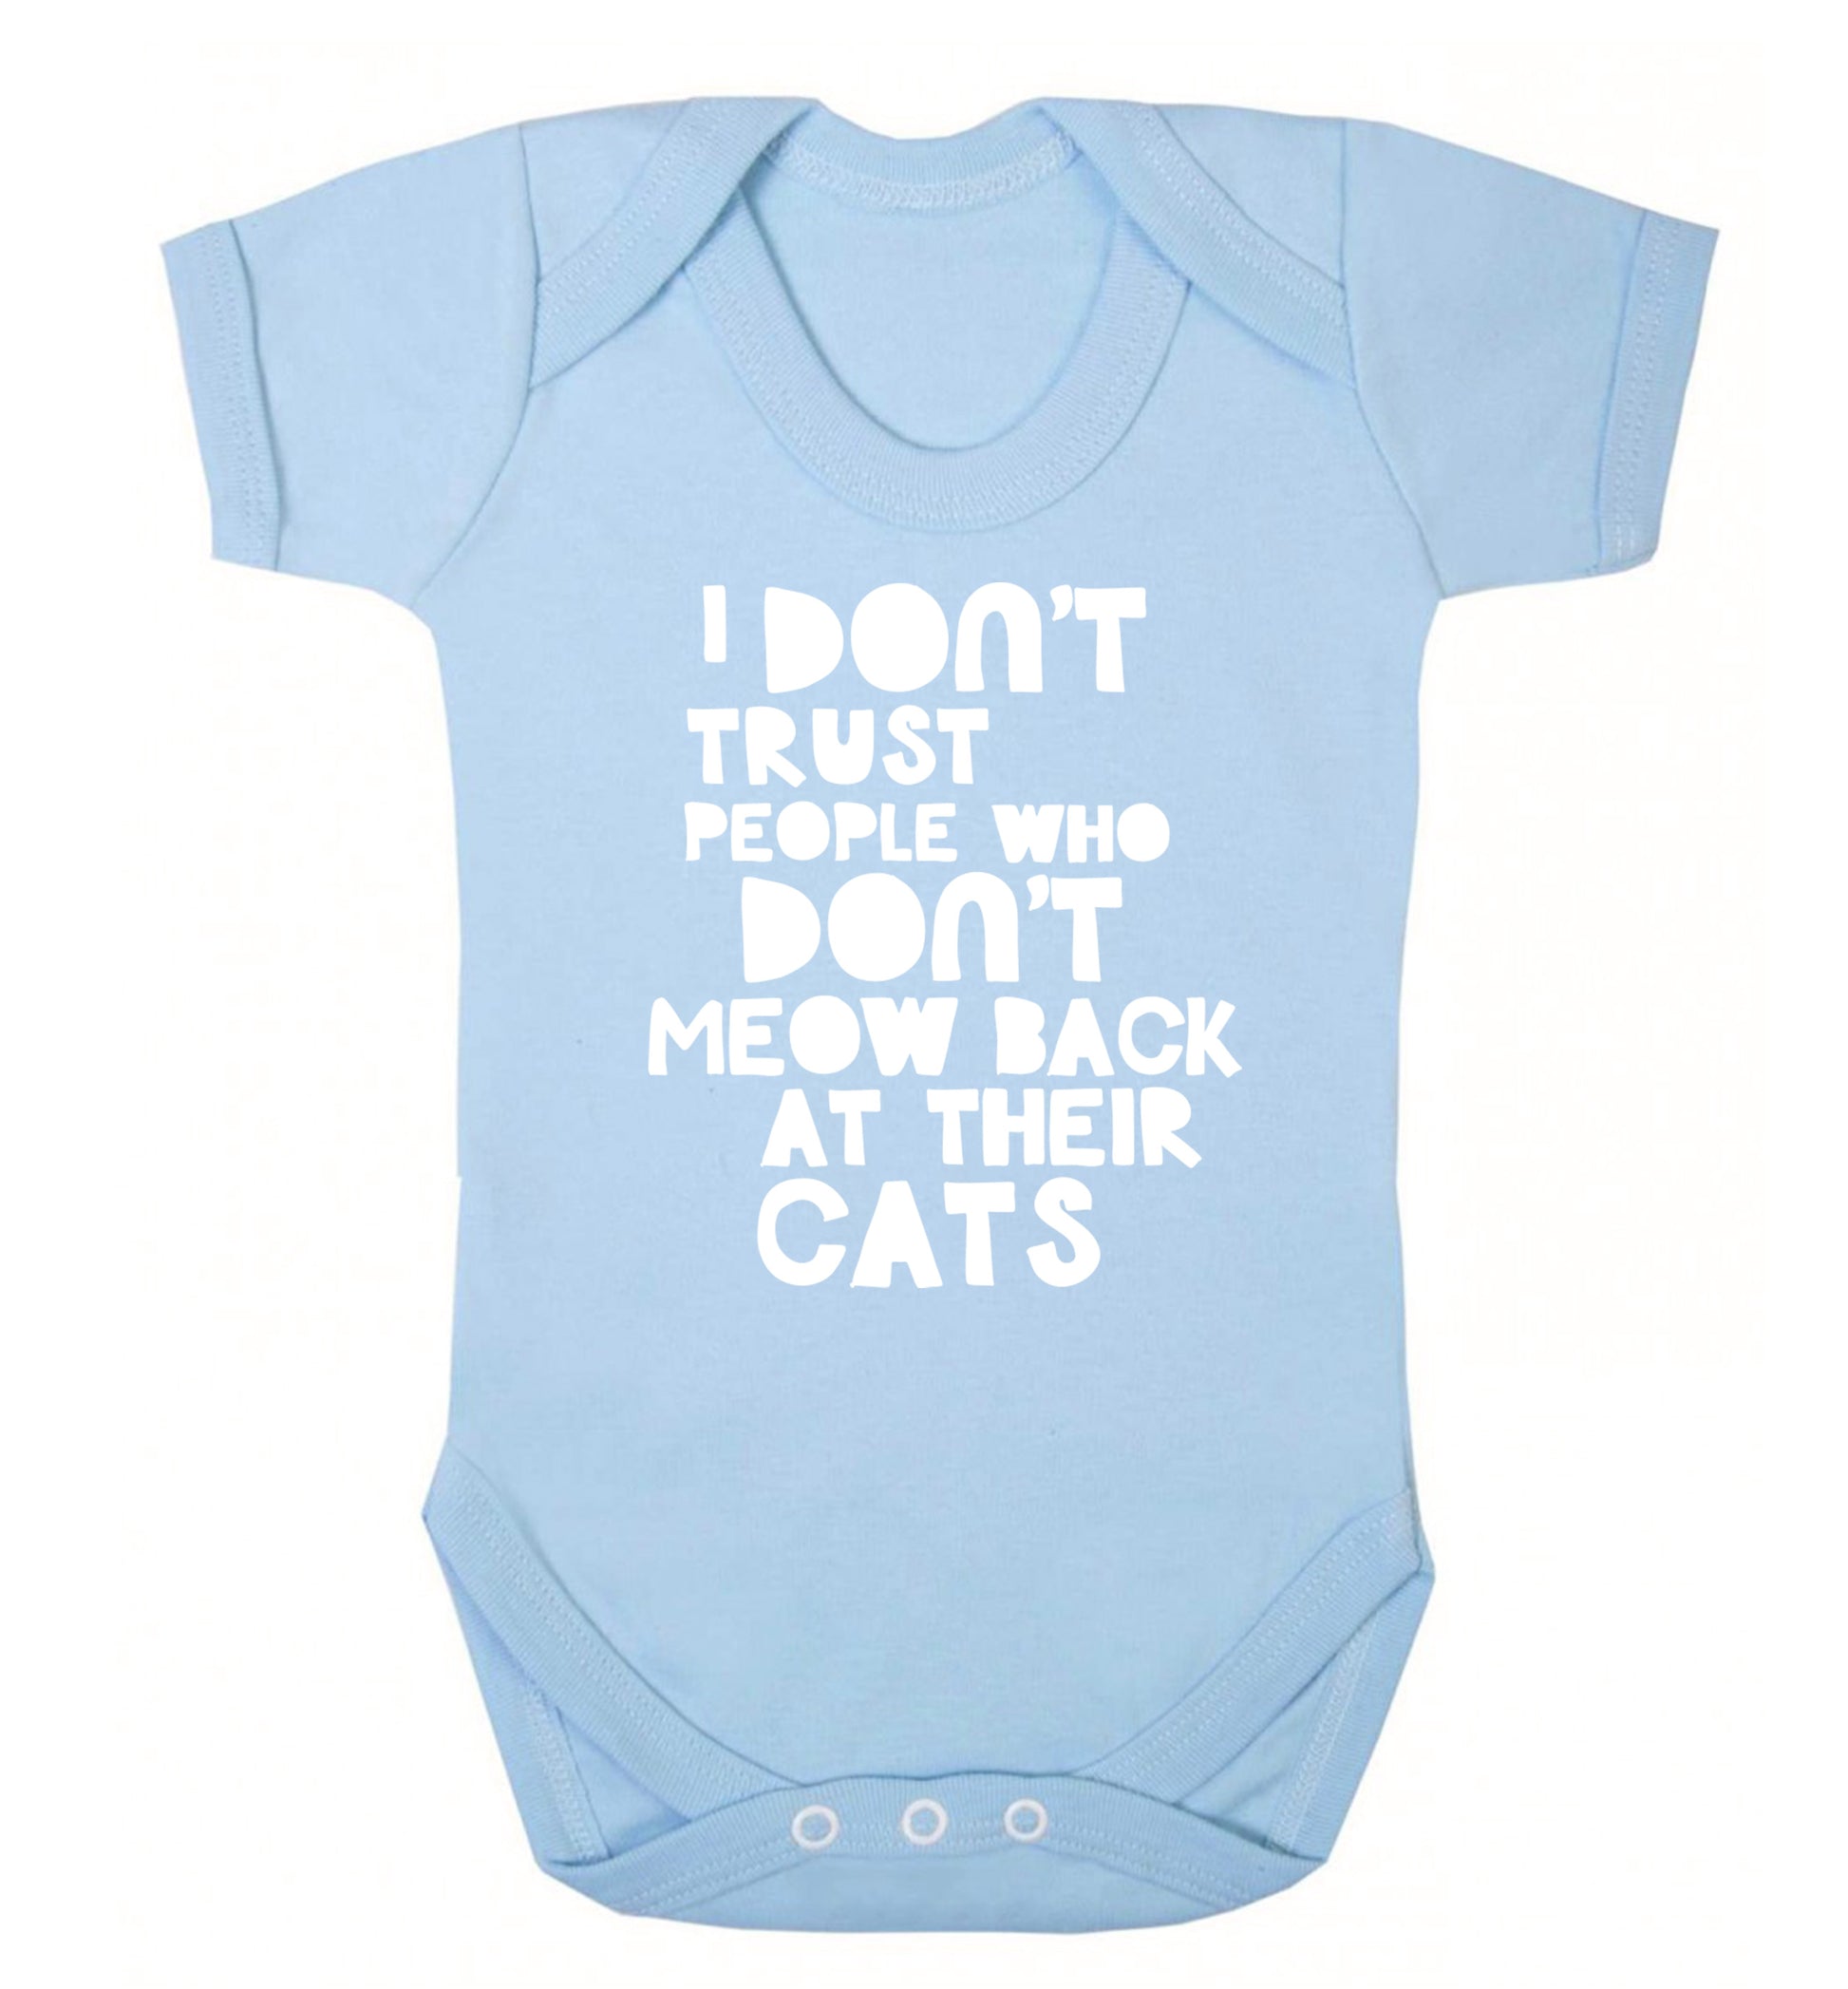 I don't trust people who don't meow back at their cats Baby Vest pale blue 18-24 months